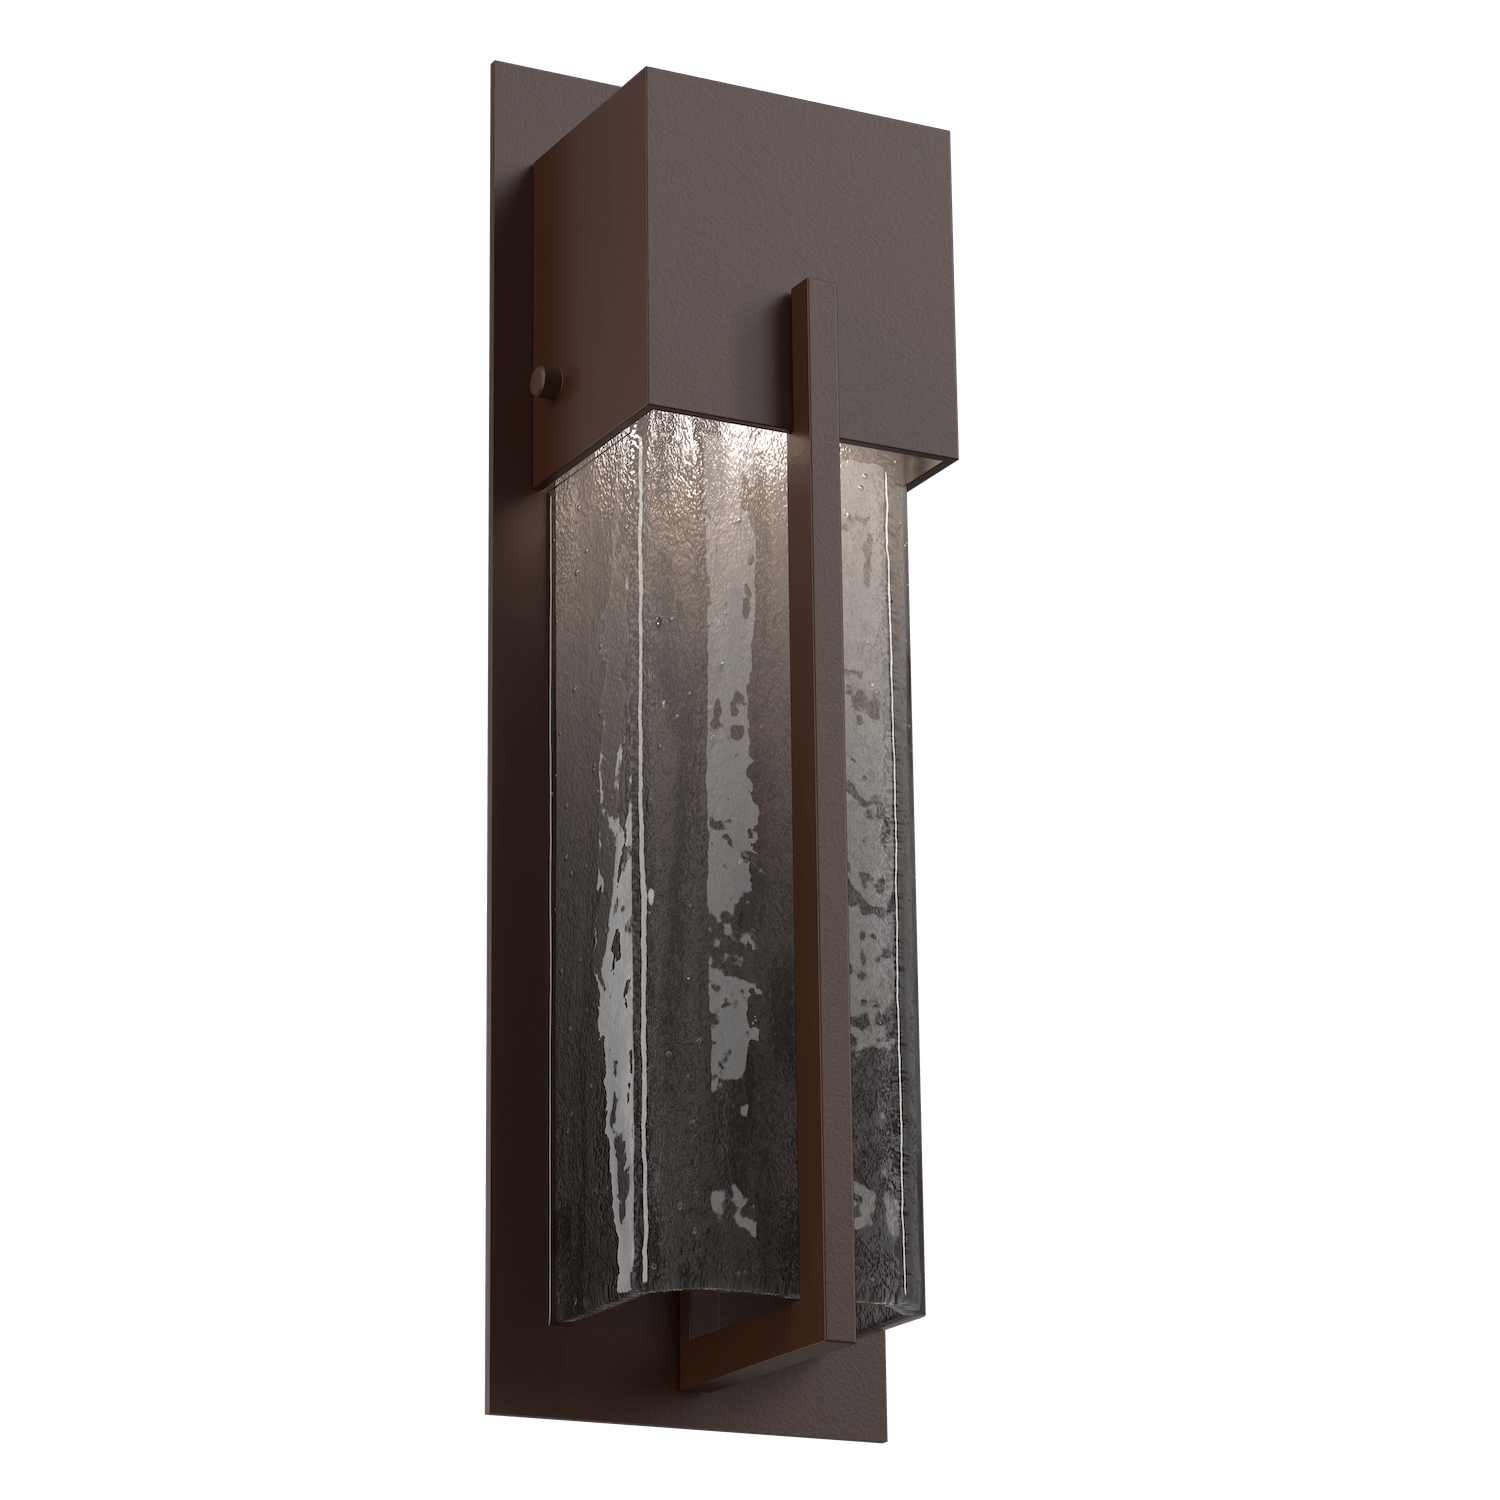 Hammerton Studio Square Outdoor Cover LED Sconce